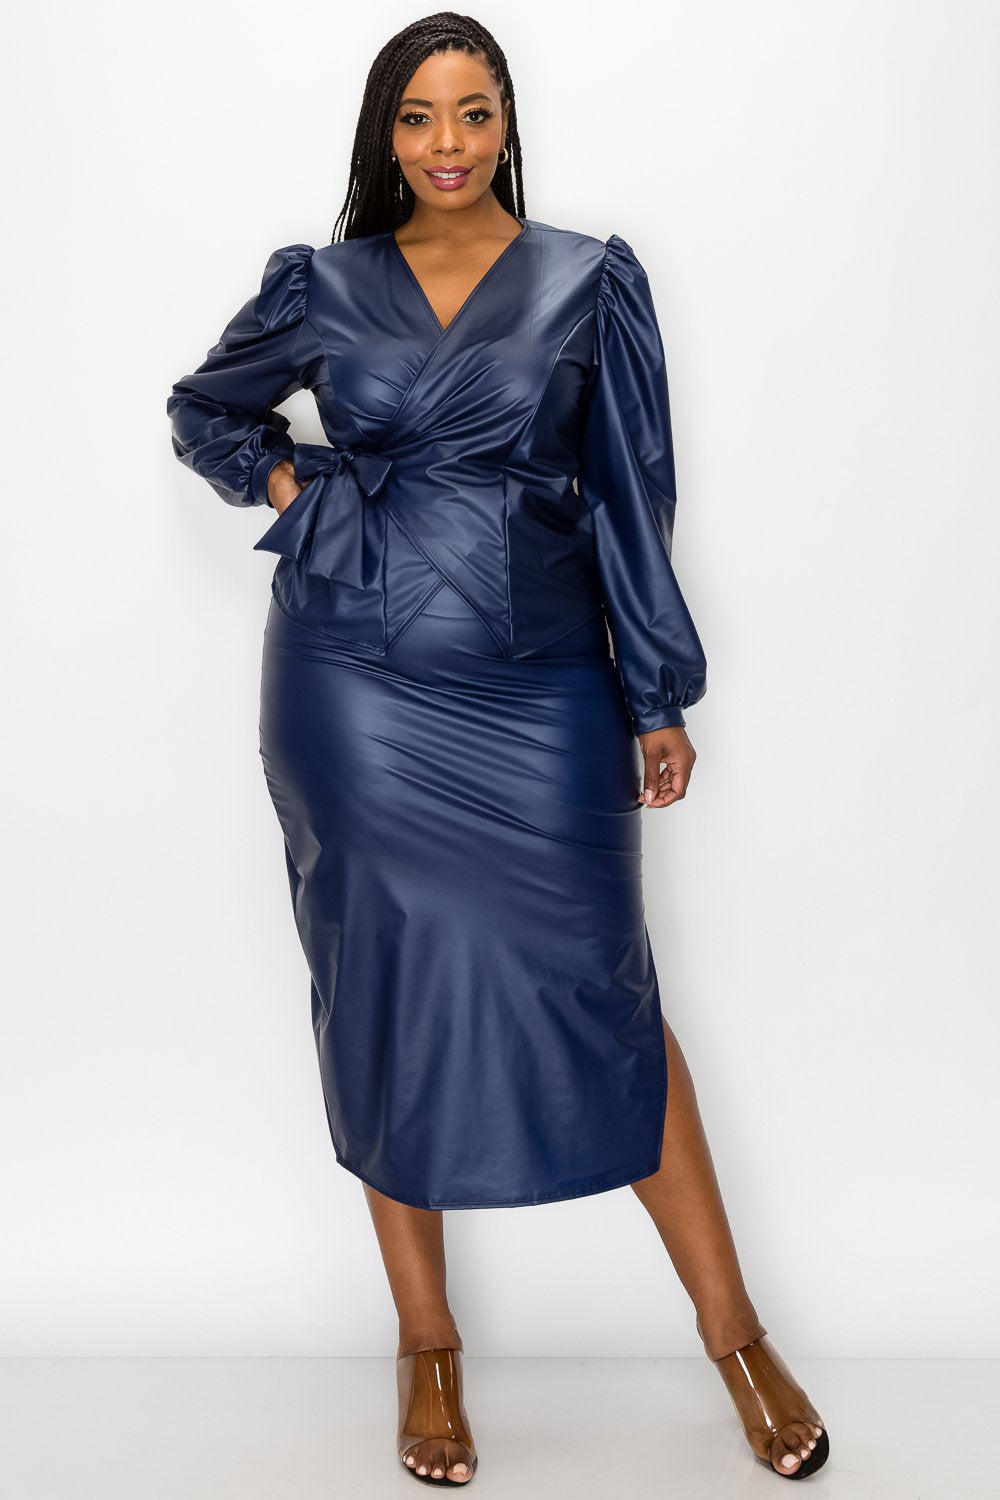 livd L I V D women's trendy plus size fashion made in USA contemporary faux leather peplum wrap top and slit midi skirt in navy